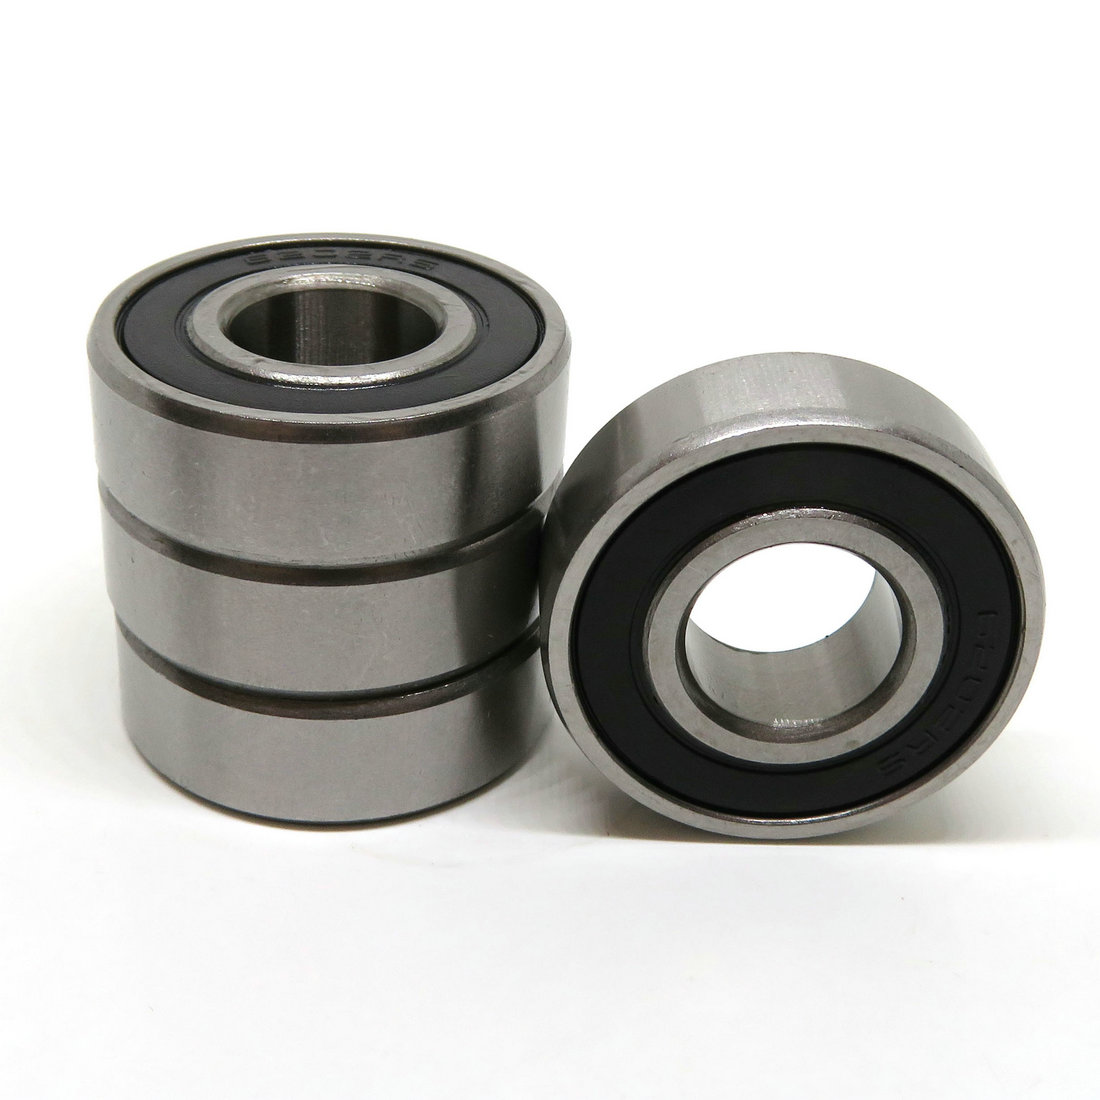 Robots Bearing 6207-2RS 35x72x17mm Ball Bearing 6207RS Double Rubber Sealed Shielded Bearing.jpg